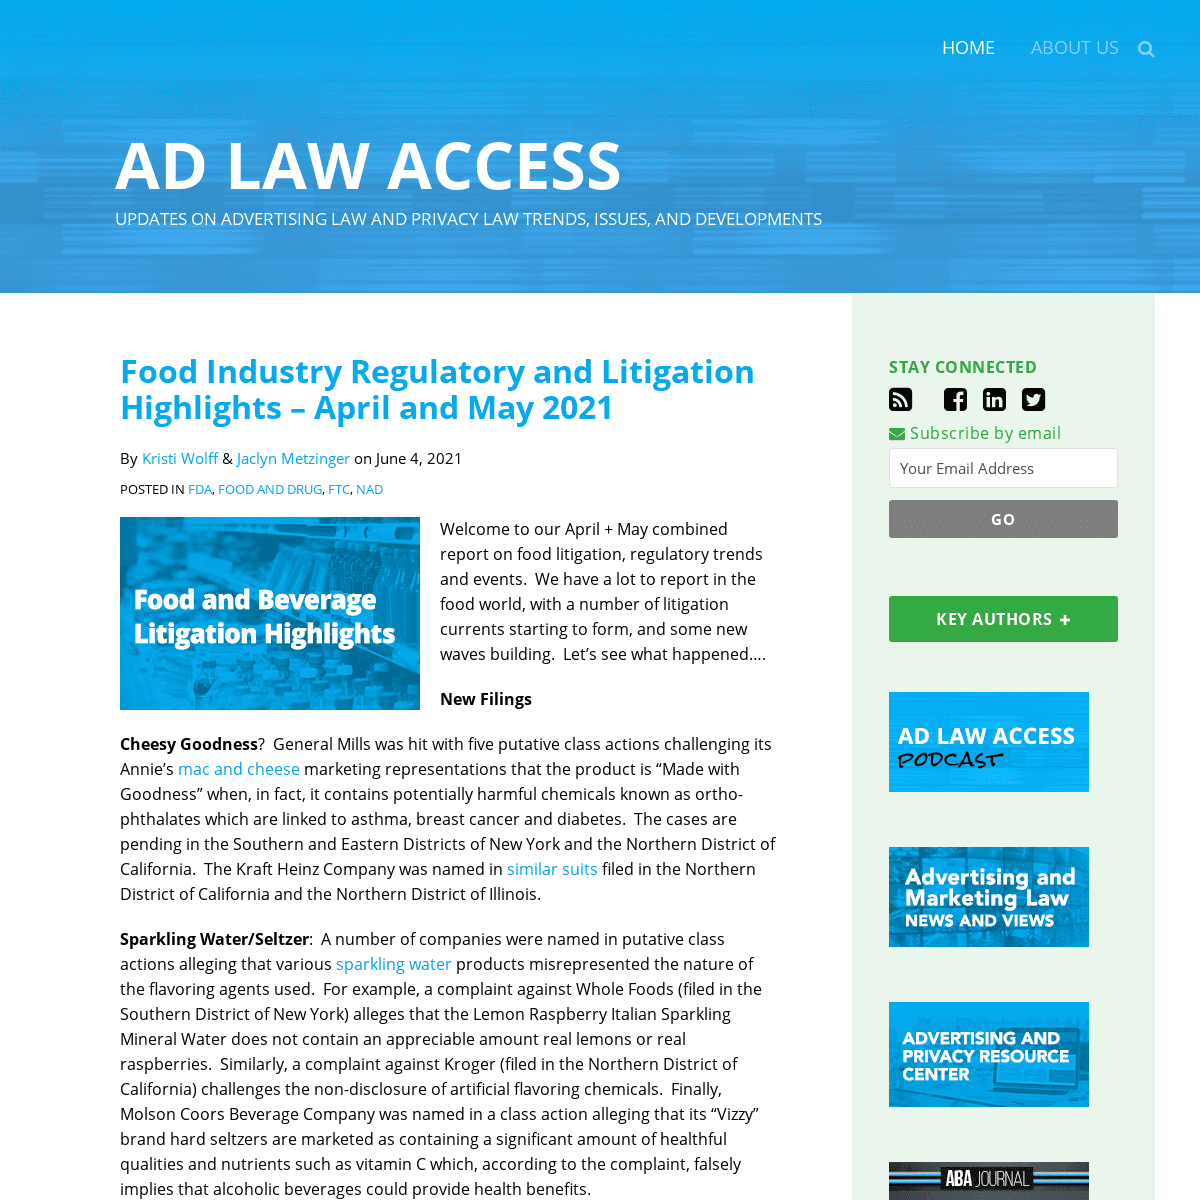 A complete backup of https://adlawaccess.com